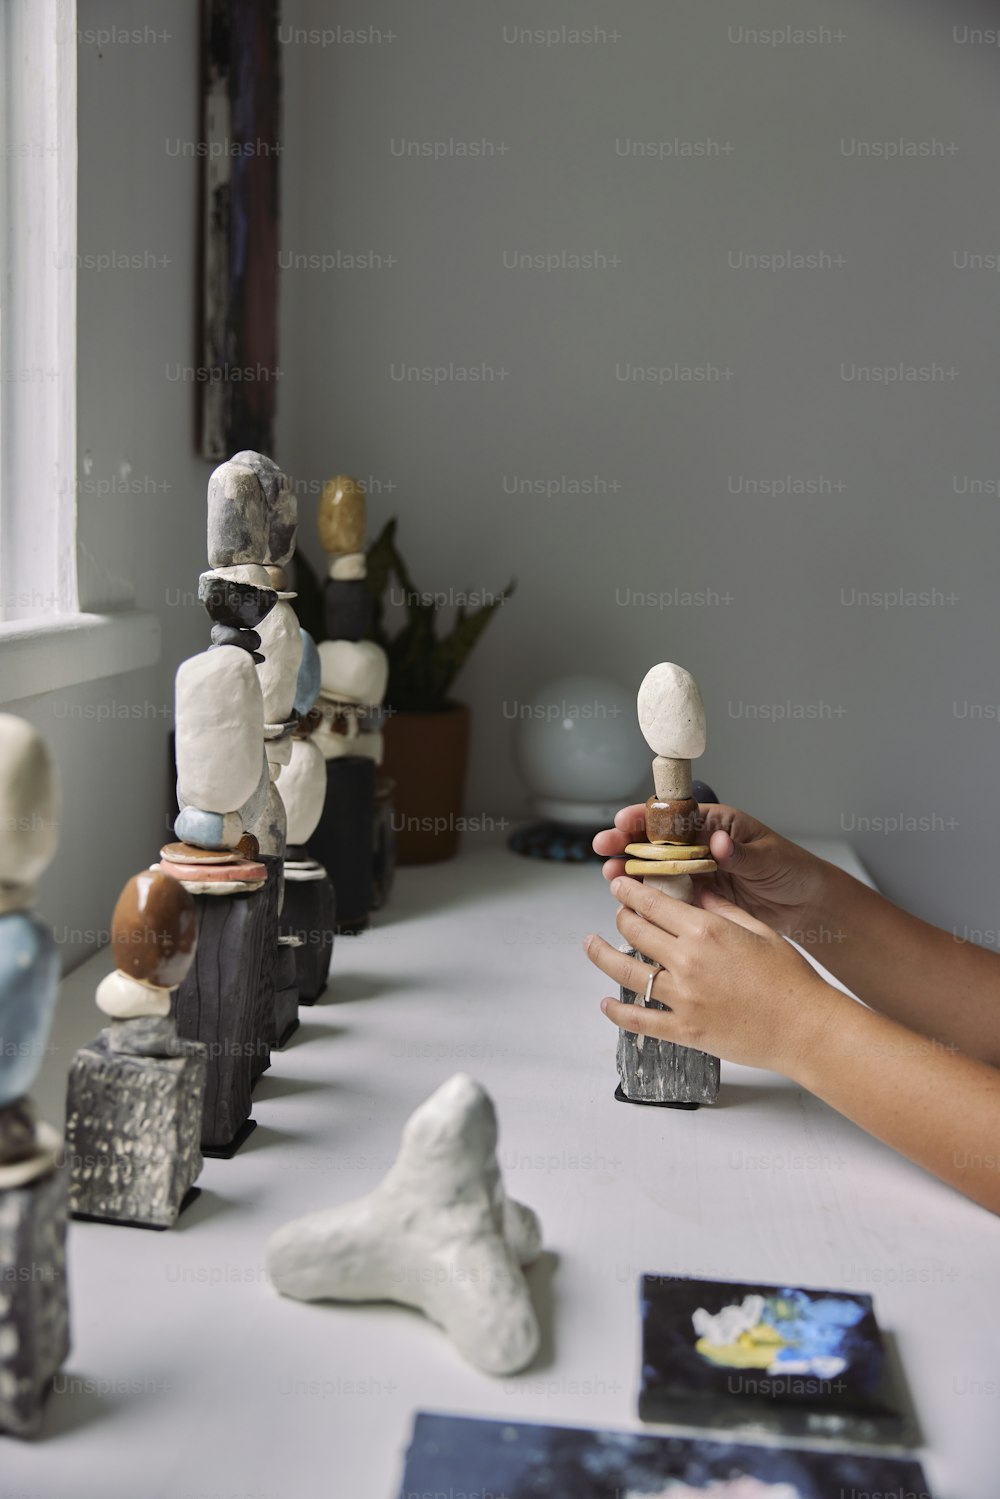 a person is holding a small bottle in front of a row of small figuri